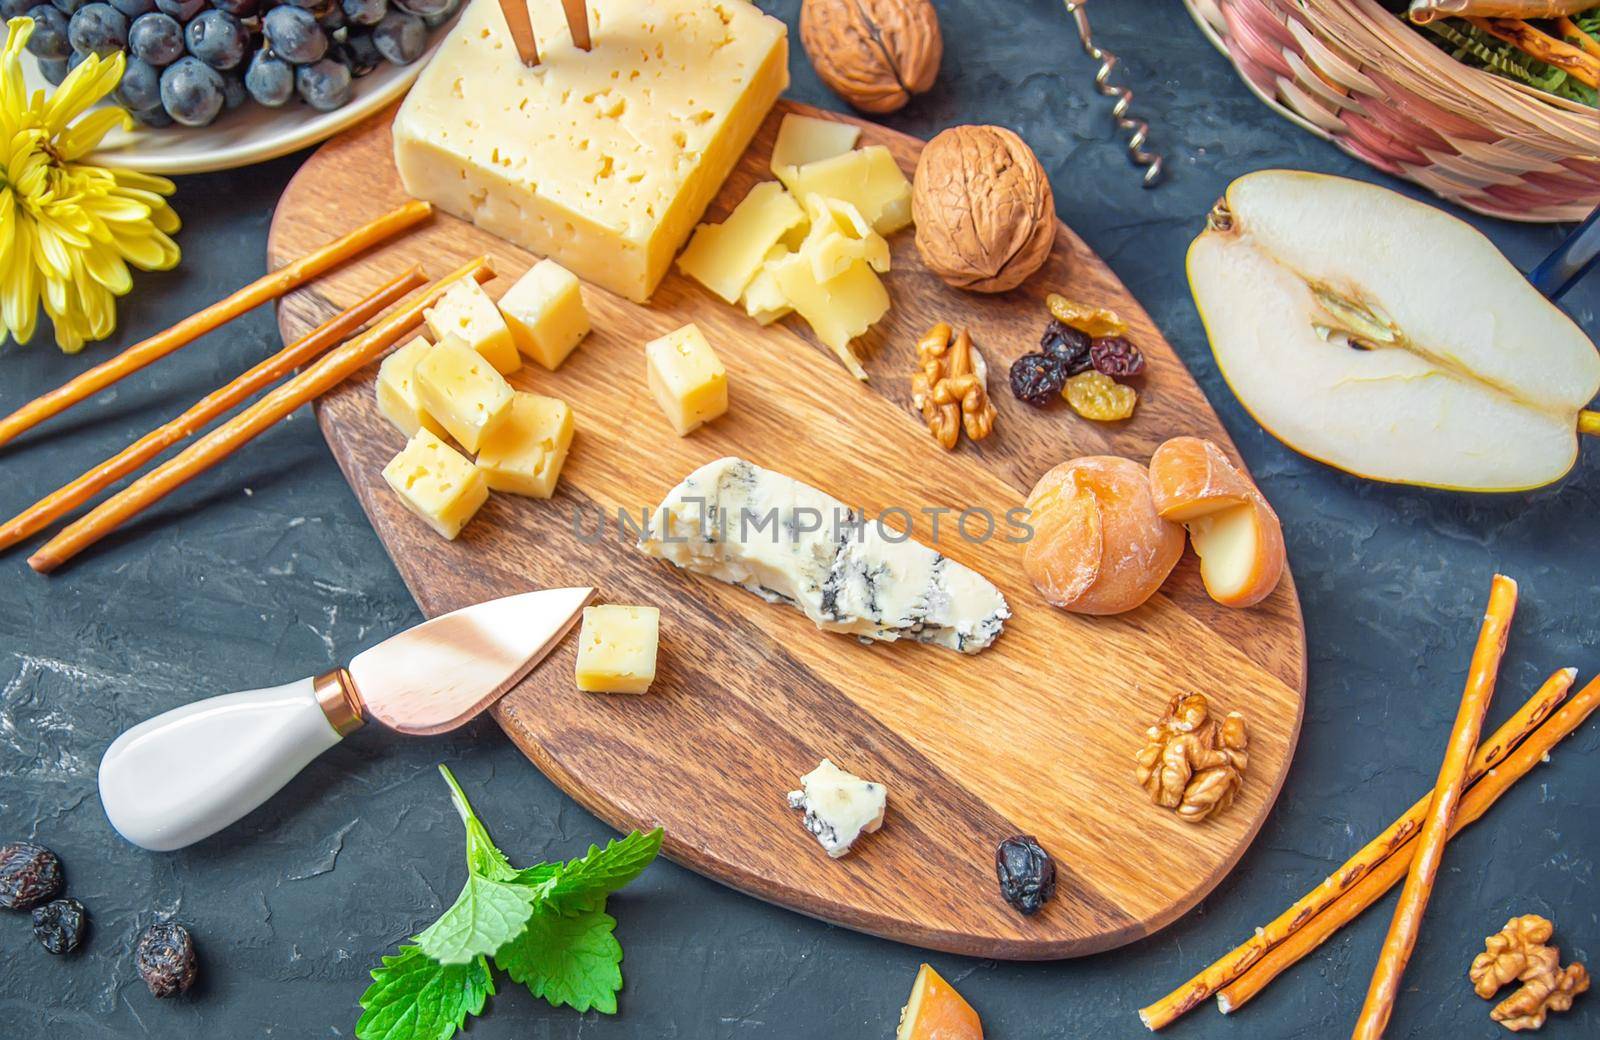 Cheese plate from different kind of cheese - Emmental, Homemade, Parmesan, blue cheese, bread sticks, walnuts, raisin, pear, grapes on a table by Estival